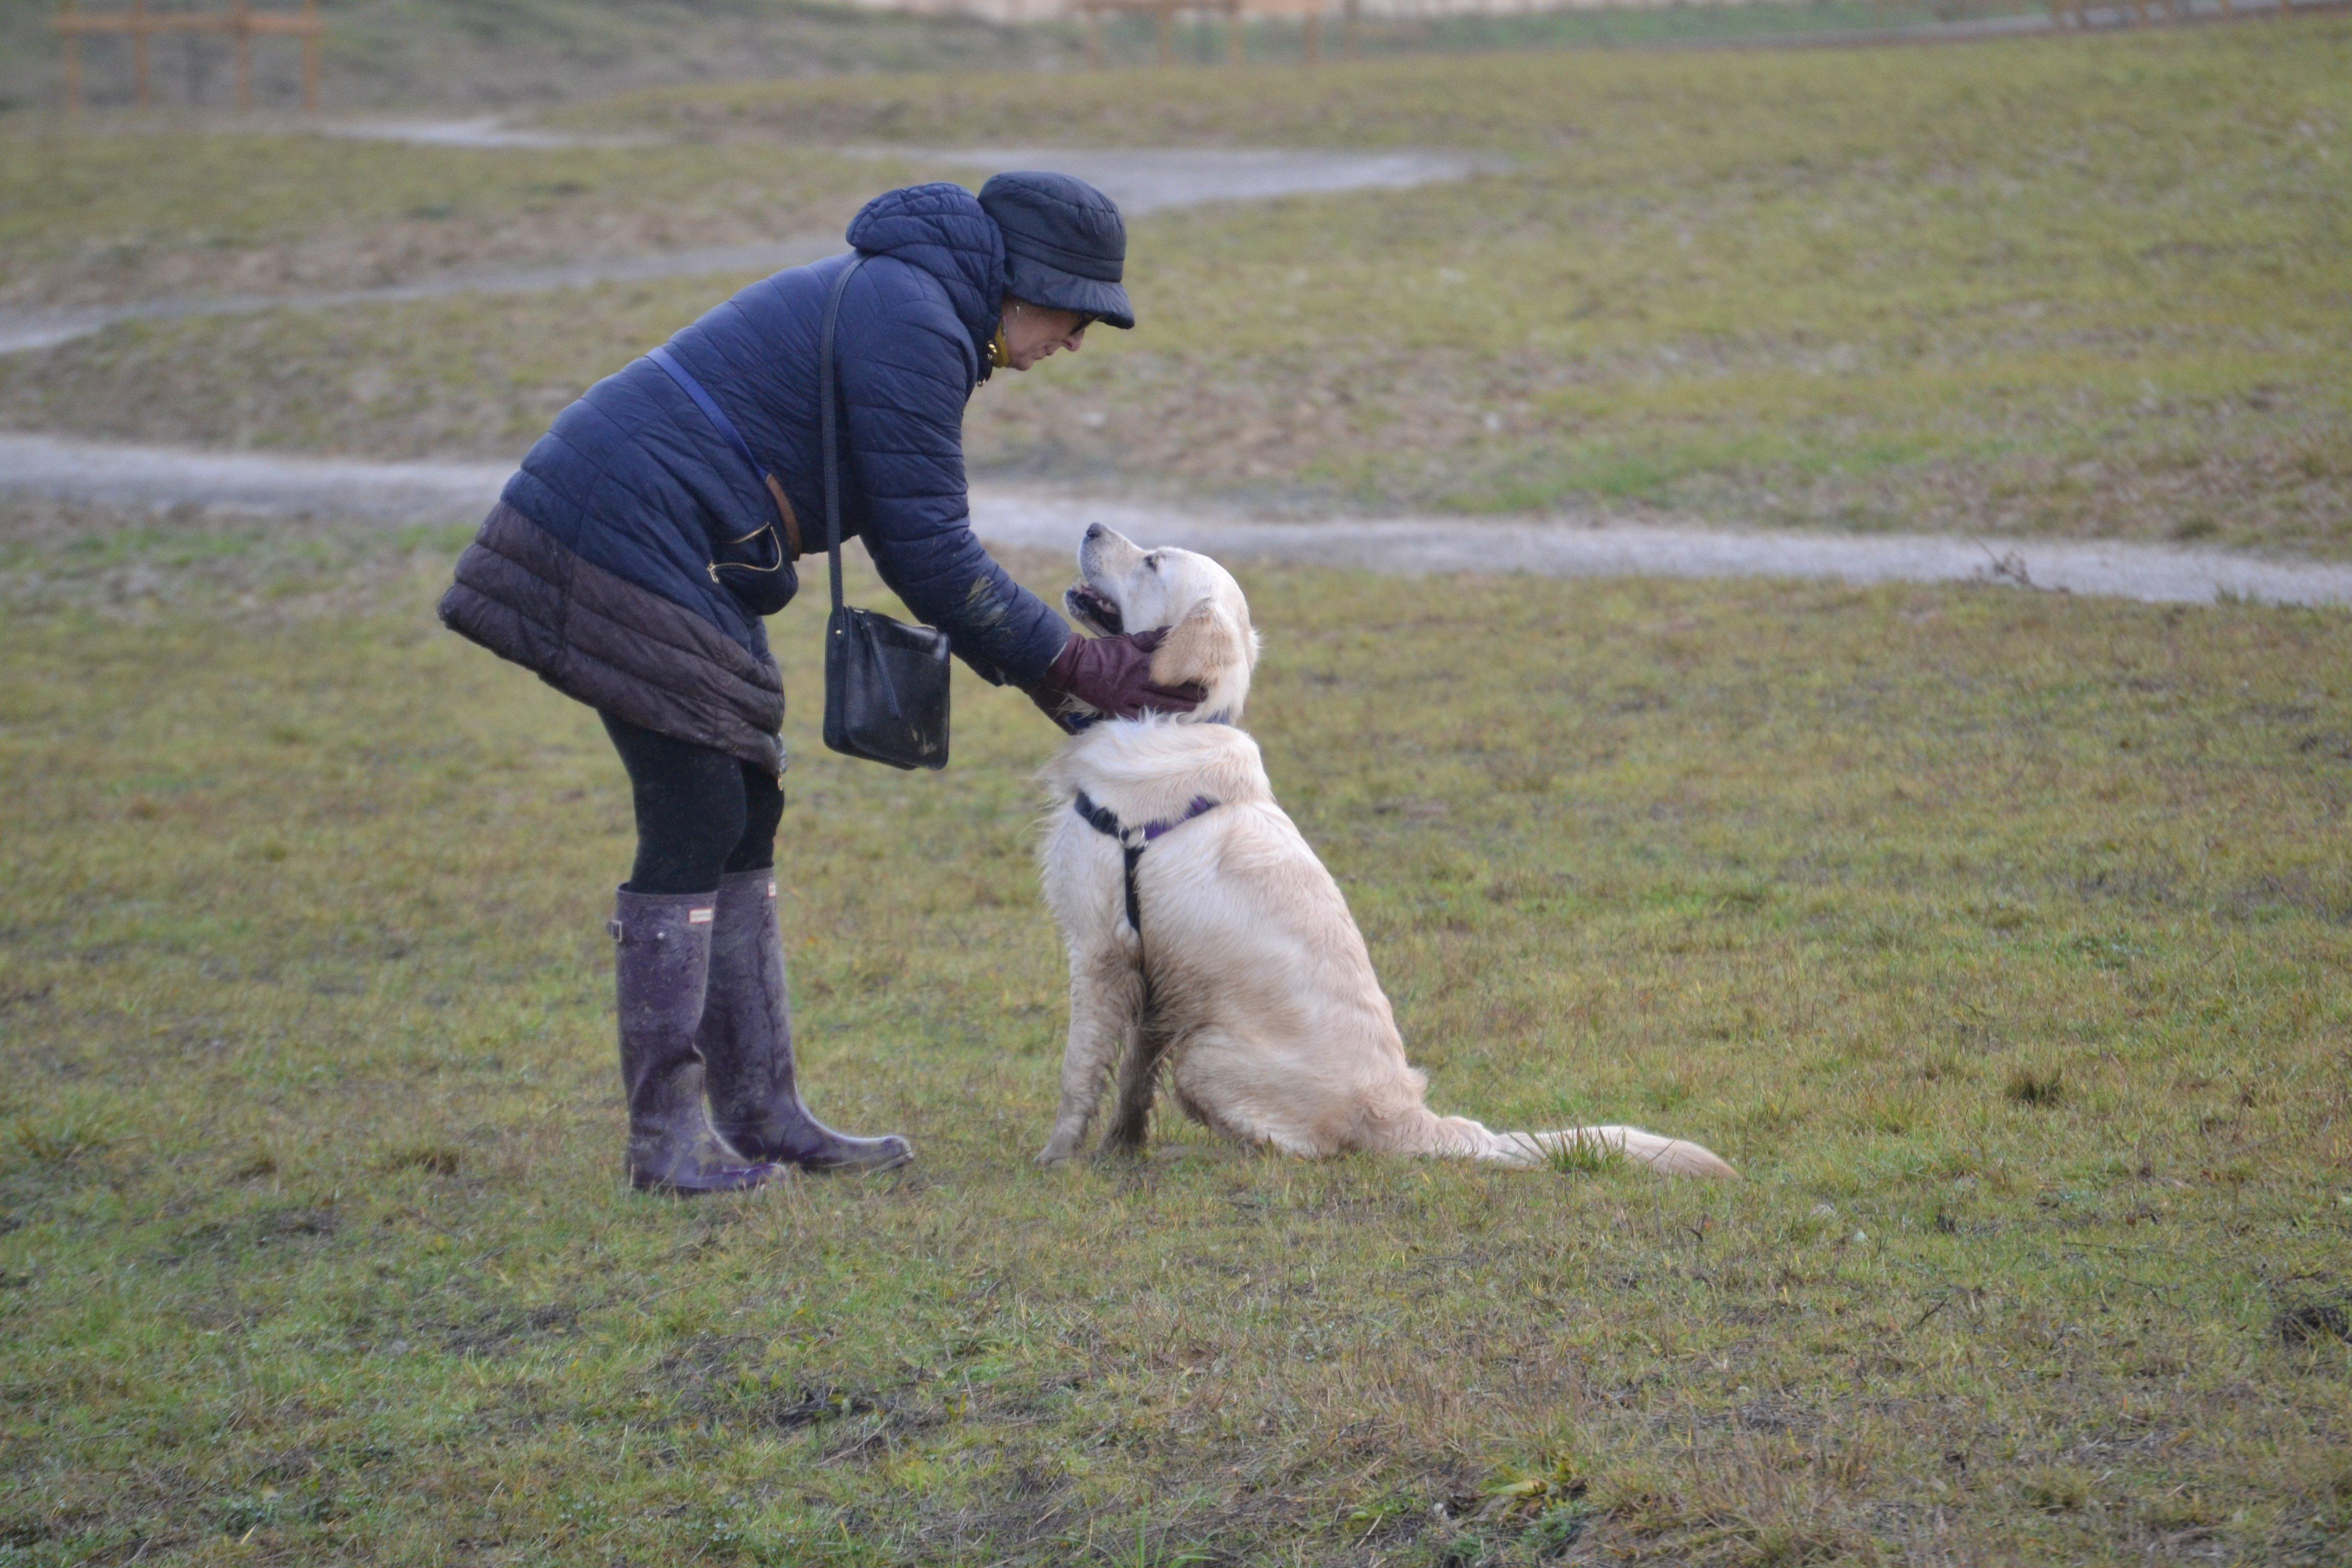 An owner and their dog at the recent  Kent and Sussex Golden Retrievers meeting, photo courtesy of Millie Goad